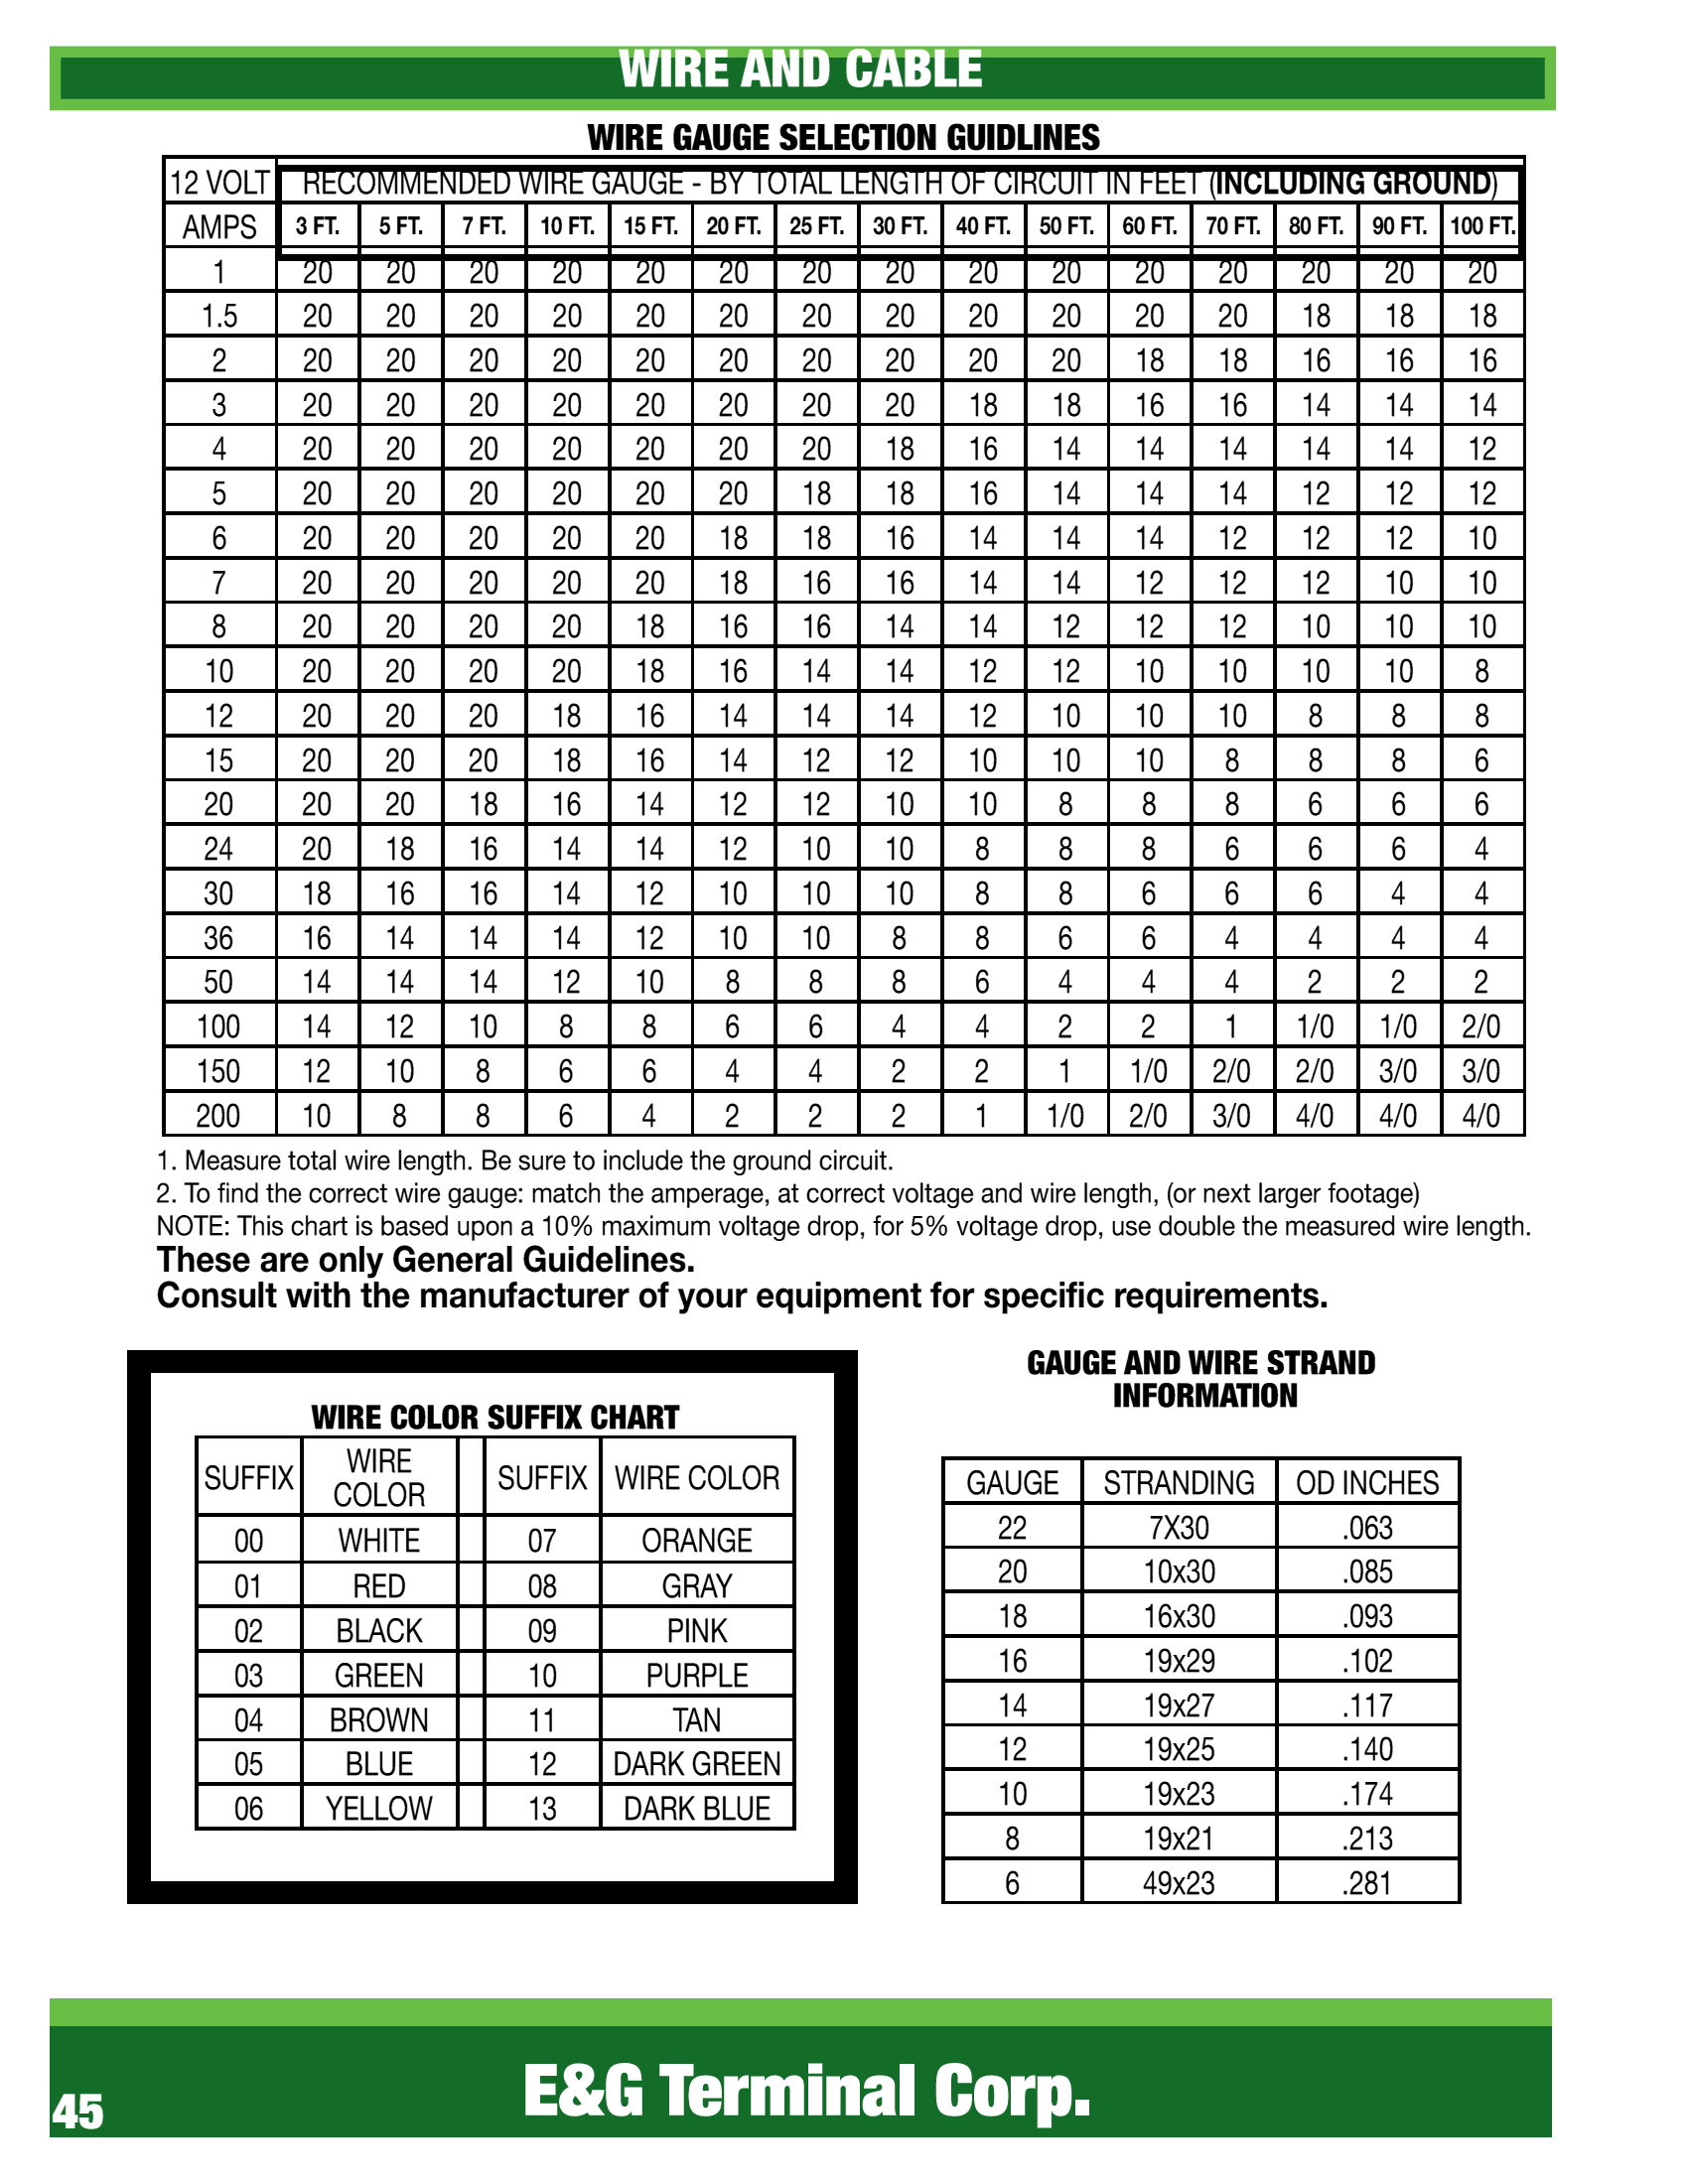 WIRE GAUGE SELECTION GUIDLINES	12 VOLT RECOMMENDED WIRE GAUGE - BY TOTAL  OF CIRCUIT IN FEET (INCLUDING GROUND)	AMPS 3 ft. 5 ft. 7 ft. 10 ft. 15 ft. 20 ft. 25 ft. 30 ft. 40 ft. 50 ft. 60 ft. 70 ft. 80 ft. 90 ft. 100 ft.	1 20 20 20 20 20 20 20 20 20 20 20 20 20 20 20	1.5 20 20 20 20 20 20 20 20 20 20 20 20 18 18 18	2 20 20 20 20 20 20 20 20 20 20 18 18 16 16 16	3 20 20 20 20 20 20 20 20 18 18 16 16 14 14 14	4 20 20 20 20 20 20 20 18 16 14 14 14 14 14 12	5 20 20 20 20 20 20 18 18 16 14 14 14 12 12 12	6 20 20 20 20 20 18 18 16 14 14 14 12 12 12 10	7 20 20 20 20 20 18 16 16 14 14 12 12 12 10 10	8 20 20 20 20 18 16 16 14 14 12 12 12 10 10 10	10 20 20 20 20 18 16 14 14 12 12 10 10 10 10 8	12 20 20 20 18 16 14 14 14 12 10 10 10 8 8 8	15 20 20 20 18 16 14 12 12 10 10 10 8 8 8 6	20 20 20 18 16 14 12 12 10 10 8 8 8 6 6 6	24 20 18 16 14 14 12 10 10 8 8 8 6 6 6 4	30 18 16 16 14 12 10 10 10 8 8 6 6 6 4 4	36 16 14 14 14 12 10 10 8 8 6 6 4 4 4 4	50 14 14 14 12 10 8 8 8 6 4 4 4 2 2 2	100 14 12 10 8 8 6 6 4 4 2 2 1 1/0 1/0 2/0	150 12 10 8 6 6 4 4 2 2 1 1/0 2/0 2/0 3/0 3/0	200 10 8 8 6 4 2 2 2 1 1/0 2/0 3/0 4/0 4/0 4/0	1. Measure total wire . Be sure to include the ground circuit.	2. To find the correct wire gauge: match the amperage, at correct voltage and wire , (or next larger footage)	Consult with the manufacturer of your equipment for specific requirements.	GAUGE STRANDING OD INCHES	22 7x30 .063	20 10x30 .085	18 16x30 .093	16 19x29 .102	14 19x27 .117	12 19x25 .140	10 19x23 .174	8 19x21 .213	6 49x23 .281	GAUGE AND WIRE STRAND	INFORMATION	WIRE AND CABLE	WIRE COLOR SUFFIX CHART	COLOR SUFFIX WIRE COLOR	00 WHITE 07 ORANGE	01 RED 08 Gray	02 BLACK 09 PINK	03 GREEN 10 PURPLE	04 BROWN 11 TAN	05 BLUE 12 DARK GREEN	06 YELLOW 13 DARK BLUE	PRIMARY WIRE -100 FOOT ROLLS - STRANDED	SAE J1128 Type GPT - 60 VOLTS	20 GA 18 GA 16 GA 14 GA 12 GA 10 GA 8 GA	White 400-20100 400-18100 400-16100 400-14100 400-12100 400-10100 400-08100	Red 400-20101 400-18101 400-16101 400-14101 400-12101 400-10101 400-08101	Black 400-20102 400-18102 400-16102 400-14102 400-12102 400-10102 400-08102	Green 400-20103 400-18103 400-16103 400-14103 400-12103 400-10103	Brown 400-20104 400-18104 400-16104 400-14104 400-12104 400-10104	Blue 400-20105 400-18105 400-16105 400-14105 400-12105 400-10105	Yellow 400-20106 400-18106 400-16106 400-14106 400-12106 400-10106	Orange 400-18107 400-16107 400-14107 400-12107 400-10107	Gray 400-18108 400-16108 400-14108 400-12108 400-10108	Pink 400-18109 400-16109 400-14109 400-12109	Purple 400-18110 400-16110 400-14110 400-12110	Tan 400-18111 400-16111 400-14111 400-12111	Dark Green 400-18112 400-16112 400-14112 400-12112	Dark Blue 400-18113 400-16113 400-14113 400-12113	PRIMARY WIRE -1000 FOOT ROLLS - STRANDED	20 GA 18 GA 16 GA 14 GA 12 GA 8 GA	White 400-18000 400-16000 400-14000 400-12000 400-08000	Red 400-20001 400-18001 400-16001 400-14001 400-12001	Black 400-20002 400-18002 400-16002 400-14002 400-12002	Green 400-20003 400-18003 400-16003 400-14003 400-12003	Brown 400-20004 400-18004 400-16004 400-14004 400-12004	Blue 400-20005 400-18005 400-16005 400-14005	Yellow 400-18006 400-16006 400-14006	Orange 400-18007 400-16007 400-14007	Gray 400-18008 400-16008 400-14008	Pink 400-18009 400-16009 400-14009	Purple 400-18010 400-16010 400-14010	Tan 400-18011 400-16011 400-14011	Dark Green 400-18012 400-16012 400-14012	Dark Blue 400-18013 400-16013 400-14013	47 E&G Terminal Corp.	MULTIMETER	REPLACEMENT TEST LEADS	 COLOR	595-FLKTL175	Fits most units	Fluke multimeters	HOOK-UP WIRE	 GAUGE COLOR	400-22100 22 White	400-22101 22 Red	400-22102 22 Black	400-22103 22 Green	400-22104 22 Brown	400-22105 22 Blue	400-22106 22 Yellow	100 FOOT ROLLS	400-14100-GXL 14 White	400-14101-GXL 14 Red	400-14102-GXL 14 Black	CROSSLINKED GXL WIRE	GXL wire withstands moisture, solvents and prolonged	extreme temperatures, making it ideal for engine	compartment applications. GXL wire is a medium thick	wire, insulated with chemically cross-linked	polyethylene for strength and durability	TEST LEAD WIRE	18 GA Fine Strand Copper .140 OD	Flexible Silicone Rubber Jacket	418-1801 Red	418-1802 Black	VIA SPECIAL ORDER	ALL ITEMS ARE SOLD AS INDICATED	SAE J1127 PVC INSULATION	 AWG SIZE STRANDING NOMINAL OD	BLACK Red INCHES	401-0602 401-0601 6 49x23 .375	401-0402 401-0401 4 49x27 .375	401-0202 401-0201 2 133x23 .440	401-0102 401-0101 1 133x22 .460	401-1002 401-1001 1/0 133x21 .520	401-2002 401-2001 2/0 133x20 .580	401-3002 3/0 266x22 .640	100 FOOT ROLLS or CUT TO ORDER	TRAILER CABLE	ozone, oil, solvents, gasoline and abrasion.	 WIRE	NO. OF	COND.	NOM.	DIA.	JACKET	COLOR BLK WHT RED BRN YEL GRN BLUE	402-164 16 4 .380 BLK • • • •	402-144 14 4 .425 BLK • • • •	402-166 16 6 .435 BLK • • • • • •	402-146 14 6 .530 BLK • • • • • •	402-147 14 7 .600 BLK • • • • • • •	402-127 12 6 .675 BLK • • • • • •	10 1 •	402-7ABS	8 1 .715 GREEN •	10 2 • •	12 4 • • • •	ALSO AVAILABLE IN 500 FT BULK SPOOLS	twin lead BATTERY CABLE	pvc insulation	COLOR	401-02102 2 GA RED/BLACK	401-04200 4 GA BLACK/WHITE	401-06207 6 GA ORANGE/BLACK	401-01269 8 GA YELLOW/BLACK	battery CABLE	49 E&G Terminal Corp.	WELDING CABLE	Premium fine strand welding cable with rugged, high performance, EPDM insulation. Excellent	flexibility even at very low temperatures. The jacket is highly resistant to breaking, abrasion, and	weather and withstands the most demanding operating conditions.	404-08 404-08R 8 168/30 .360	404-06 404-06R 6 259/30 .320	404-04 404-04R 4 378/30 .376	404-02 404-02R 2 636/30 .430	404-01 404-01R 1 730/30 .510	404-10 404-10R 1/0 1007/30 .560	404-20 404-20R 2/0 1254/30 .600	404-40 404-40R 4/0 2014/30 .720	250 FOOT ROLLS or CUT TO ORDER	SO SERVICE CORD	• Black Rubber Insulation	• Heavy Duty • 600 Volt Rated	• Stranded Copper Conductors	COND. OD	406-1630 16/3 .396	406-1640 16/4 .420	406-1430 14/3 .535	406-1440 14/4 .575	406-1230 12/3 .595	406-1240 12/4 .650	406-1030 10/3 .660	406-1040 10/4 .715	250 FOOT ROLLS or CUT TO ORDER	SJ SERVICE CORD	• General Purpose • 300 Volt Rated	406-1821 18/2 .285	406-1831 18/3 .305	406-1621 16/2 .310	406-1631 16/3 .330	406-1641 16/4 .365	406-1421 14/2 .340	406-1431 14/3 .375	406-1441 14/4 .410	406-1231 12/3 .430	Larger sizes available on Special Order	GRAY JACKETED PARALLEL PRIMARY WIRE - Type GPT	60 VOLTS OR LESS	SAE J1128	 WIRE NO. OF	CONDUCTORS BLACK WHITE RED GRN	413-1621 16 2 • •	413-1631 16 3 • • •	413-1641 16 4 • • • •	413-1421 14 2 • •	413-1431 14 3 • • •	413-1441 14 4 • • • •	413-1221 12 2 • •	413-1231 12 3 • • •	413-1241 12 4 • • • •	413-1021 10 2 • •	413-1031 10 3 • • •	BULK SPOOLS AVAILABLE - CONTACT E&G	BONDED PARALLEL PRIMARY WIRE- Type GPT	CONDUCTORS BROWN YELLOW GREEN WHITE BLACK RED	412-1821 18 2 • •	412-1621 16 2 • •	412-1631 16 3 • • •	412-1641 16 4 • • • •	412-1421 14 2 • •	412-1431 14 3 • • •	412-1441 14 4 • • • •	51 E&G Terminal Corp.	CONVOLUTED SPLIT LOOM	BLACK POLYETHYLENE	100 FT ROLL SIZE ID 	BULK SPOOL	FEET PER	SPOOL	421-38100 1/4 421-38250 250	421-42100 3/8 421-42200 200	421-46100 1/2 421-46250 250	421-50100 5/8	421-52100 3/4	421-56100 1	421-60 1-1/4	421-64 1-1/2	SPIRAL WRAP TUBING Spiral cut polyethylene tubing is used to hold bundles	of wires together. It is also used to wrap tubing and control rods for protection	from abrasion and for noise suppression. Spiral cut tubing has an elastic	memory and tends to come back to and hold it's original shape.	WHITE	NOMINAL	MAXIMUM	BUNDLE	ROLL	462-3400 3/16 1-1/2 100 FT	462-3800 462-3802 1/4 2 100 FT	462-4200 462-4202 3/8 3 100 FT	462-4600 462-4602 1/2 4 100 FT	462-5200 462-5202 3/4 6 50 FT	462-5600 462-5602 1 8 50 FT	WIRE LOOM TOOL	LOOM	 LOOM SIZE	421-3844 1/4-7/16	421-4650 1/2-5/8	421-5254 3/4-7/8	FABRIC LOOM	SAE J562 Asphalt Coated	Cotton Polyester Weave	Max Operating Temperature	275° F	 ID	420-34 3/16 100	420-38 1/4 100	420-40 5/16 100	420-42 3/8 100	420-46 1/2 100	WIRE loom products	bulk Spool Only	TECHFLEX EXPANDABLE BRAIDED SLEEVING	•Resists Fraying When Cut With Scissors	•High Abrasion Resistance	•Temp Range From -94ºF To 257ºF	•Melt Temp 482ºF	•Black	 NOMINAL SIZE EXPANSION RANGE MIN/OD MAX/OD STANDARD ROLL	852-341 1/8" 1/8" 1/4" 100 FT	852-381 1/4" 5/32" 7/16" 100 FT	852-421 3/8" 3/16" 5/8" 100 FT	852-461 1/2" 1/4" 3/4" 100 FT	852-521 3/4" 5/8" 1" 75 FT	852-561 1" 3/4" 1-13/16" 50 FT	TECHFLEX HIGH TEMPERATURE BRAIDED SLEEVING	•Resin Coated Fiberglass Construction	•Temp Range From -94ºF To 1202ºF	•Melt Temp 2048ºF	•Easy To Install - Cuts With Scissors	•Resists Gasoline And Most Chemicals	 NOMINAL SIZE MAXIMUM DIAMETER STANDARD ROLL	852-429 3/8" 5/8" 50 FT	852-469 1/2" 3/4" 50 FT	852-529 3/4" 1-1/8" 50 FT	ALSO SOLD BY THE FOOT	TECHFLEX WRAPPABLE SPLIT BRAIDED SLEEVING	•Easy, cost effective installation	•More flexible than convoluted split loom or sprial wrap	•25% edge overlap	•Cut and abrasion resistant	•Temp range from -94ºF to 257ºF, melt temp 482ºF	 NOMINAL SIZE STANDARD ROLL SIZE	852-F6N0.25-BLK 1/4" 100 FT	852-F6N0.38-BLK 3/8" 75 FT	852-F6N0.50-BLK 1/2" 75 FT	852-F6N0.75-BLK 3/4" 50 FT	852-F6N1.00-BLK 1" 50 FT	*Many other sizes and styles available, contact E&G*	53 E&G Terminal Corp.	HEAT SHRINKABLE DUAL WALL POLYOLEFIN TUBING - Meltable Inner Wall	around the configurations of the object being covered. When cool, the entire mass becomes rigid,	tough molding, making dual-wall tubing is an excellent encapsulation for delicate components.	Dual-wall tubing is excellent where moisture is a problem, the final seal forms a moisture proof barrier.	Operating Temperature: -55°C to 110°C	Shrink Ratio: 3 to 1	Shrink Temperature: 135°C / 275°F	6 INCH S - PRE-PACKAGED	1/8 444-2426 16	3/16 444-3426 14	1/4 444-3826 10	3/8 444-4226 8	1/2 444-4626 444-4616 6	3/4 444-5226 444-5216 4	1 444-5626 444-5616 2	4 FOOT S - BULK	1/8 444-24248	3/16 444-34248 444-34348	1/4 444-38248 444-38348	3/8 444-42248 444-42348	1/2 444-46248 444-46148	3/4 444-52248 444-52148	1 444-56248 444-56148	12 INCH S - EXTRA HEAVY DUTY	DUAL-WALL SHRINK TUBING	 BLACK  RED SIZE RANGE ACTUAL I.D.	444-3504 444-3404 6 GA-1 GA .80"	444-3506 444-3406 2 GA-4/0 1.10"	6 Inch	4 Foot s	12 Inch s	HEAT SHRINK TUBING	DUAL WALL	HEAT SHRINKABLE SINGLE WALL POLYOLEFIN TUBING	Single wall is a general purpose heat shrinkable tubing used for insulating, jacketing, bundling and	identification. Operating Temperature: -67°F to 275°F Shrink Ratio: 2 to 1	Shrink Temperature: 121°C / 250°F UL, CSA Approved - 600V Rated	6 INCH S - PRE-PACKAGED	1/16 445-1226 36	1/8 445-2426 28	3/16 445-3426 24	1/4 445-3826 20	3/8 445-4226 16	1/2 445-4626 445-4616 14	3/4 445-5226 445-5216 12	1 445-5626 445-5616 8	1/16 445-12248	1/8 445-24248	3/16 445-34248	1/4 445-38248	3/8 445-42248	1/2 445-46248 445-46148	3/4 445-52248 445-52148	1 445-56248 445-56148	1-1/2 445-64248	2 445-72248	ROLLS - BLACK ONLY	1/8 445-242100 100 FT	3/16 445-342100 100 FT	1/4 445-382100 100 FT	3/8 445-422100 100 FT	1/2 445-462100 100 FT	3/4 445-52250 50 FT	1 445-56250 50 FT	SINGLE WALL	55 E&G Terminal Corp.	STRENGTH	MAX. BUNDLE	DIAMETER WIDTH STD PKG	450-T18R0 450-T18R9 4 " 18 LBS 3/4” .10” 100	450-T18I0 450-T18I9 5-3/4 " 18 LBS 1-1/4” .10” 100	450-T30R0 450-T30R9 6 " 30 LBS 1-1/4” .14” 100	450-T40R0 450-T40R9 8-1/2 " 40 LBS 2” .15” 100	450-T50R0 450-T50R9 8 " 50 LBS 1-3/4” .18” 100	450-T50I0 450-T50I9 12-1/8 " 50 LBS 3” .18” 100	450-T50L0 450-T50L9 15-1/2 " 50 LBS 4” .18” 100	450-T120R0 450-T120R9 15-1/4 " 120 LBS 4” .30” 50	450-T150M0 450-T150M9 21 " 175 LBS 6” .35” 25	450-T150R0 15 " 175 LBS 4” .35” 25	450-T150L0 450-T150L9 32 " 175 LBS 9” .35” 25	450-T50MR0 450-T50MR9 8-1/2" 50 LBS 1-3/4" .18” 50	BUTTON HEAD TIES - BLACK	MAXIMUM BUNDLE	DIAMETER WIDTH STANDARD	450-132-00011 15" 100 4-5/16" .22" 100	DUAL CLAMP TIES - BLACK	 MINIMUM TENSILE STRENGTH MAXIMUM BUNDLE DIAMETER STANDARD	450-DCT90HIRK2 150 LBS 1.3" Each Side 50	450-DCT110HIRK2 150 LBS 2.3" Each Side 50	PREMIUM CABLE TIES	CABLE TIE MOUNTING BASE - ADHESIVE BACKED	CABLE TIE	SIZE BASE SIZE STD PKG	450-240 450-241 18-30 LBS 3/4" SQUARE 25 OR 100	450-320 450-321 15-50 LBS 1" SQUARE 25 OR 100	CABLE TIE ACCESSORIES	CABLE TIE INSTALLATION TOOL	Lightweight and durable.	Works with all 18 to 50 lb rated cable ties.	450-99080	INDIVIDUALLY	NYLON TUBING CLAMPS	ADHESIVE BACKED	 RANGE STD PKG BULK PKG	450-57 5/32 to 1/4 10 100	450-58 5/16 to 1/2 10 100	57 E&G Terminal Corp.	STEEL LOOM CLAMPS	PLATED STEEL	REMOVABLE CUSHION.	1/4” MOUNTING HOLE	 CLAMP ID SAE SIZE std pkg	454-38 1/4 4 25	454-42 3/8 6 25	454-46 1/2 8 25	454-50 5/8 10 25	454-52 3/4 12 25	454-54 7/8 14 25	454-56 1 16 25	454-58 1-1/8 18 EACH	454-60 1-1/4 20 EACH	454-62 1-3/8 22 EACH	454-64 1-1/2 24 EACH	454-68 1-3/4 28 EACH	454-70 1-7/8 30 EACH	454-72 2 32 EACH	454-74 2-1/4 36 EACH	454-75 2-3/8 38 EACH	454-76 2-1/2 40 EACH	454-80 3 48 EACH	BLACK VINYL DIPPED	 CLAMP	I.D.	700-17087 3/16 25	700-9381 1/4 25	700-9382 5/16 25	700-9383 3/8 25	700-9384 1/2 25	700-9385 5/8 25	700-9386 3/4 25	700-9387 7/8 25	700-9388 1” 25	3/8” MOUNTING HOLE	 CLAMP I.D. STD PKG	700-10598 1/4 25	700-10599 5/16 25	700-10600 3/8 25	700-10601 1/2 25	700-10602 5/8 25	700-10603 3/4 25	700-10604 7/8 25	700-10605 1 25	700-10606 1-1/4 25	700-10607 1-1/2 25	700-17588 1-3/4 10	700-17589 2 10	HEAVY DUTY	1/2” MOUNTING HOLE	454-2628-80 2-1/2 EACH	454-2628-96 3 EACH	454-2628-112 3-1/2 EACH	454-2628-128 4 EACH	LOOM CLAMPS	NYLON CABLE CLAMPS	CLAMP	HOLE STD PKG	456-24 456-24B 1/8 3/16 100	456-34 456-34B 3/16 3/16 100	456-38 456-38B 1/4 3/16 100	456-40 456-40B 5/16 3/16 100	456-42 456-42B 3/8 3/16 100	456-46 456-46B 1/2 3/16 100	456-48 9/16 3/16 50	456-50 456-50B 5/8 3/16 50	456-52 456-52B 3/4 3/16 50	456-54B 7/8 3/16 50	456-56 456-56B 1 3/16 50	VINYL GROMMETS - BLACK	 DIMENSIONS IN INCHES A B C D E STD PKG	464-38 1/8 1/16 11/32 3/16 1/4 25	464-40 3/16 1/16 7/16 7/32 5/16 25	464-42 1/4 1/16 9/16 1/4 3/8 25	464-44 5/16 1/16 5/8 1/4 7/16 25	464-46 3/8 1/16 5/8 1/4 1/2 25	464-50 1/2 1/16 13/16 9/32 5/8 25	464-51 25/64 1/8 27/32 3/8 21/32 25	464-52 1/2 3/32 7/8 11/32 3/4 25	464-54 5/8 1/16 1-1/8 9/32 7/8 25	464-56 11/16 1/16 1-5/16 3/8 1 10	464-60 7/8 1/8 1-5/8 1/2 1-1/4 10	464-62 1 1/8 1-3/4 1/2 1-3/8 10	464-64 1-1/8 1/16 1-7/8 3/8 1-1/2 EACH	464-68 1-1/2 1/16 2-1/8 7/16 1-3/4 EACH	464-76 2-1/8 1/16 2-7/8 7/16 2-1/2 EACH	LOOM CLAMPS & GROMMETS	59 E&G Terminal Corp.	3M COLORED VINYL	ELECTRICAL TAPE	 WIDTH &  COLOR BOX 	660-350 3/4" x 66 FT White 10	660-351 3/4" x 66 FT Red 10	660-353 3/4" x 66 FT Green 10	660-354 3/4" x 66 FT Brown 10	660-355 3/4" x 66 FT Blue 10	660-356 3/4" x 66 FT Yellow 10	660-357 3/4" x 66 FT Orange 10	660-358 3/4" x 66 FT Gray 10	660-359 3/4" x 66 FT Violet 10	ECONOMY ELECTRICAL TAPE	Imported - PVC 7 mil. UL Approved	 WIDTH & 	660-360 3/4" x 60 FT	10 ROLLS PER SLEEVE	ALSO SOLD INDIVIDUALLY	3M LINERLESS	RUBBER SPLICING TAPE	30 mil High Voltage	 WIDTH &  BOX 	660-130 3/4" x 30 FT 1	SCOTCH AUTO ELECTRIC	SEALING COMPOUND	660-6147 2-1/2" x 10 FT 1	ASTM FRICTION TAPE	660-1755 3/4"x60 FT	COLD SHRINK TAPE	Becomes solid rubber with no heat.	660-56230 1" x 30 FT	3M SUPER 33 PLUS	PREMIUM VINYL PLASTIC	7 Mil. tape - UL/CSA - Rated	 WIDTH &	 BOX 	660-6133 3/4" x 52 FT 10	3M WIRE MARKING TAPE	660-12174 Dispenser #0-9	660-STD Dispenser Empty	660-00 Refill #0 x 96"	660-01 Refill #1 x 96"	660-02 Refill #2 x 96"	660-03 Refill #3 x 96"	660-04 Refill #4 x 96"	660-05 Refill #5 x 96"	660-06 Refill #6 x 96"	660-07 Refill #7 x 96"	660-08 Refill #8 x 96"	660-09 Refill #9 x 96"	660-SPB-01 Book #0-9 & L1 & T1	660-SPB-02 Book #0-15 & A-Z	electrical TAPE PRODUCTS	5X20mm	Fast Acting	Type GMA	5 PER BOX	716-GMA1	716-GMA2	716-GMA3	716-GMA5	716-GMA8	716-GMA10	716-GMA15	AUTOMOTIVE FUSES	1/4x1-1/4	Ceramic	Type ABC	1/4" Automotive	Fuses	Type SFE	Fuses	Type GBC	1/4X5/8	Type AGA	1/4X1	Type AGX	1/4X7/8	Type AGW	Type AGC	5 PER BOX 5 PER BOX 5 PER BOX 5 PER BOX 5 PER BOX 5 PER BOX 5 PER BOX	716-ABC5 716-SFE4 716-GBC8 716-AGA1 716-AGX3 716-AGW3 716-AGC.5	716-ABC10 716-SFE6 716-GBC15 716-AGA1.5 716-AGX10 716-AGW6 716-AGC1	716-ABC15 716-SFE7.5 716-GBC16 716-AGA2 716-AGX20 716-AGW15 716-AGC1.5	716-ABC25 716-SFE9 716-GBC25 716-AGA3 716-AGX30 716-AGW20 716-AGC2	716-ABC30 716-SFE14 716-GBC30 716-AGA5 716-AGW30 716-AGC2.5	716-SFE20 716-AGA15 716-AGC3	716-SFE30 716-AGA20 716-AGC4	716-AGA30 716-AGC5	716-AGC6	716-AGC7.5	716-AGC8	716-AGC10	716-AGC15	716-AGC20	716-AGC25	716-AGC30	716-AGC35	716-AGC40	Slow Blow	Type MDL	716-MDL.5	716-MDL1	716-MDL1.5	716-MDL2	716-MDL3	716-MDL4	716-MDL5	716-MDL8	716-MDL10	716-MDL15	716-MDL20	716-MDL25	716-MDL30	FUSE PULLER	716-FP-A3 Glass Tube & ATC 1	61 E&G Terminal Corp.	BLADE FUSES	Blade-Type	Auto Fuse	Type ATC	Micro-Blade	Type ATL	Type ATR	Mini-Blade	Type ATM	Type ATM-LP	Low Profile	Maxi-Blade	Type MAX	5 PER BOX 5 PER BOX 5 PER BOX 5 PER BOX 5 PER BOX 1 PER BOX	716-ATC1 716-ATL5 716-ATR5 716-ATM2 716-ATM3LP 716-MAX20	716-ATC2 716-ATL7.5 716-ATR7.5 716-ATM3 716-ATM5LP 716-MAX25	716-ATC3 716-ATL10 716-ATR10 716-ATM4 716-ATM7.5LP 716-MAX30	716-ATC4 716-ATL15 716-ATR15 716-ATM5 716-ATM10LP 716-MAX40	716-ATC5 716-ATR20 716-ATM7.5 716-ATM15LP 716-MAX50	716-ATC7.5 716-ATR25 716-ATM10 716-ATM20LP 716-MAX60	716-ATC10 716-ATR30 716-ATM15 716-ATM25LP 716-MAX70	716-ATC15 716-ATM20 716-ATM30LP 716-MAX80	716-ATC20 716-ATM25	716-ATC25 716-ATM30	716-ATC30	716-ATC40	BLADE FUSES - BULK	100 PER BOX	100 PER BOX 100 PER BOX	716-ATC1B 716-ATM2B	716-ATC2B 716-ATM3B	716-ATC3B 716-ATM5B	716-ATC5B 716-ATM7.5B	716-ATC7.5B 716-ATM10B	716-ATC10B 716-ATM15B	716-ATC15B 716-ATM20B	716-ATC20B 716-ATM25B	716-ATC25B 716-ATM30B	716-ATC30B	MEGA FUSES	Type AMG	MIDI FUSES	Type AMI	ANN FUSES	Type ANN	716-AMG100 716-AMI30 716-ANN100	716-AMG125 716-AMI40 716-ANN150	716-AMG150 716-AMI50 716-ANN175	716-AMG175 716-AMI60 716-ANN200	716-AMG200 716-AMI70 716-ANN250	716-AMG250 716-AMI80 716-ANN300	716-AMG300 716-AMI100 716-ANN400	716-AMG500 716-AMI125 716-ANN500	high amp fuses	PAL FUSES - TYPE FLF	 AMP RATING COLOR	716-FLF-20 20 LT Blue	716-FLF-30 30 Pink	716-FLF-40 40 Green	716-FLF-50 50 Red	716-FLF-60 60 Yellow	PAL FUSES - TYPE FLM	716-FLM-30 30 Pink	716-FLM-60 60 Yellow	716-FLM-80 80 Black	716-FLM-100 100 Blue	PAL FUSES - TYPE FMX	716-FMX20 20 Blue	716-FMX30 30 Pink	716-FMX40 40 Green	716-FMX50 50 Red	716-FMX60 60 Yellow	PAL FUSES - TYPE FMM	MICRO	716-FMM15 15 Gray	716-FMM20 20 Blue	716-FMM25 25 White	716-FMM30 30 Pink	716-FMM40 40 Green	PAL FUSES - TYPE FMXLP	716-FMX20LP 20 Blue	716-FMX25LP 25 White	716-FMX30LP 30 Pink	716-FMX40LP 40 Green	716-FMX50LP 50 Red	716-FMX60LP 60 Yellow	PAL FUSES - TYPE FLb	716-FLB-40 40 Pink	716-FLB-50 50 Yellow	716-FLB-60 60 Black	63 E&G Terminal Corp.	ACCESSORY FUSE PANELS FOR ATC TYPE FUSES	Fuse panels for blade-type fuses. A single, common power input makes it simple to wire	Molded of high grade thermoplastic, for superior performance.	Quick-connect .250" male blade terminals for easy installation.	 POSITIONS	CLEAR	COVER	716-15600-06-20 6 GANG Yes	716-15600-06-21	(With Ground) 6 GANG Yes	716-15600-08-20 8 GANG Yes	716-15600-12-20 12 GANG Yes	732-46377-18 18 GANG No	FUSE HOLDERS	MEGA FUSE HOLDER WITH COVER	716-HMEG	MIDI FUSE HOLDER WITH COVER	716-HMID	ANN/anl FUSE HOLDER WITH CLEAR COVER	716-24228-7	ANN/anl FUSE HOLDER NO COVER	716-SFR	716-15600-06-21	716-15600-08-20	716-HHG	Universal inline	fuse holder	12ga wire with cover	716-HHTR	Universal	ATR accessory	fuse tap	make 2 fusible	circuits from one	716-HHC	16ga wire/no cover	716-HHX	6ga wire	716-HHD	12ga wire/no cover	716-HMK	12ga wire	glass fuses	716-HHA	Universal ATC	accessory fuse tap	Converts one circuit	into	two fusible circuits	716-HRJ	14ga wire	716-HHM	716-HHB	Crimp type	12ga thru 16ga	type glass fuses	716-HHL	16ga wire with cover	716-HTB-28-I	Panel mount	1/4" male 90°	blade terminals	716-HHH	Universal ATM	716-HJMHH	1/4" male blade	716-30105	ATM LOW PROFILE	into two	fusible circuits	716-HKP	Solder	connections	716-HH2	Fuses Not Included	65 E&G Terminal Corp.	818-52259	7-WAY JUNCTION BOX WITH	Weather Resistant	Sealing Grommets Included	716-3816	SINGLE STUD	POWER BLOCK	3/8-16 stud	3/16 mounting holes	TERMINAL BLOCKS	 GANGS STUD DIMENSIONS	732-4721-P3 3 10-32 5/8"W x 3-1/4" L	732-4721-P4 4 10-32 5/8"W x 3-7/8" L	732-4721-P6 6 10-32 5/8"W x 5-1/8" L	TERMINAL BLOCKS - HOT FEED	 GANGS STUD SIZE DIMENSIONS	732-46206-04 4 10-32 5/8"W x3-7/8" L	732-M449 10	2@1/4-20	And	10@10-32	1-1/4"W x5-3/4" L	DOUBLE ROW TERMINAL BLOCKS - UL/CSA RATED	 GANGS AMP RATING VOLTAGE RATING WIDTH	440-1402 2 30 300V 7/8"	440-1404 4 30 300V 7/8"	440-1406 6 30 300V 7/8"	440-1432 JUMPER FOR 7/8" WIDE TERMINAL BLOCKS	440-1806 6 30 600V 1-1/8"	440-1808 8 30 600V 1-1/8"	440-1810 10 30 600V 1-1/8"	440-1812 12 30 600V 1-1/8"	440-1832 JUMPER FOR 1-1/8" WIDE TERMINAL BLOCKS	 TYPE VOLTS AMPS TERMINALS DIODE OR RESISTOR BRACKET	757-87401 3 12V 20/40 5 NO NO	757-87402 1 12V 30/40 4 NO NO	757-87424 3 12V 30/40 5 DIODE NO	757-87115 3 24V 10/20 5 RESISTOR NO	757-87106 1 12V 30 4 NO YES	757-87499 3 12V 20/40 5 NO YES	757-87430 1 12V 70 2 @1/4"	2 @ 3/8" RESISTOR YES	732-RA400112NN 1 12V 40 4 NO YES	732-RC400112NN 3 12V 40 5 NO YES	RELAYS	TYPE 1	Normally Open	4 Terminals	TYPE 3	Change Over	5 Terminals	RELAY AMP RATINGS AND LOAD INFORMATION	Lower rating is for motor or inductive loads	67 E&G Terminal Corp.	757-87123 757-87127 757-87129B 757-87272 757-87269	Relay base with bracket Relay pigtail Relay pigtail for 70 amp	4 terminal relays Relay base terminal Relay base terminal	terminal relays	2 @ 1/4" Blade width	2 @ 5/16" Blade width	1/4" Blade width 5/16" Blade width	(Not included)	757-87272 And	2 Ea. 757-87269	Fits most relay bases	and pigtails	Fits 70 amp relay bases	and pigtails	757-87411 3 12V 30/40 5 RESISTOR	WEATHER	RESISTANT	757-87417 3 12V 30/40 5 RESISTOR	757-87421 3 24V 10/20 5 RESISTOR	757-87416 3 12V 20 5 RESISTOR NO	MINI RELAY	757-74980 3 12V 20/35 5 RESISTOR NO	MICRO RELAY	757-87173	RELAY PIGTAIL	Weather resistant pre-wired pigtail	757-BRS007	Pre-wired pigtail for most	4 or 5 terminal relays	RELAY BASES and TERMINALS	757-87179	 VOLTS NUMBER OF	TERMINALS TYPE	442-550 12 3 Variable load 2-6 lamps thermal type	12A maximum current draw	442-552 12 2 Variable load 2-6 lamps thermal type	442-EL12C 12 2 Variable load electronic 1-12 lamps	30A maximum current draw	442-EL13C 12 3 Variable load electronic 1-12 lamps	25A maximum current draw	816-572 12 2 LED electronic flasher with ground	2.5A maximum current draw	816-570 12 2 Variable load electro-mechanical 1-12 lamps	25A maximum current draw	816-571 12 3 Variable load electro-mechanical 1-12 lamps	816-576 12 2 Variable load electronic 1-20 lamps	45A maximum current draw	816-577 12 3 Variable load electronic 1-20 lamps	TURN SIGNAL FLASHERS	FLASHER SOCKET	 732-3032	Pre-wired flasher socket with bracket	3 Terminal	HEADLAMP SOCKET	 732-3028-2	3 Crimp or solder contacts included	Can also be used as a flasher socket	69 E&G Terminal Corp.	AUTOMOTIVE MINIATURE LAMPS	 VOLTAGE AMPS	431-PR2 2.38 .50	431-PR3 3.57 .50	431-PR6 2.47 .30	431-24 14.0 .24	431-37 14.0 .09	431-53 14.4 .12	431-55 7.0 .41	431-57 14.0 .24	431-63 7.0 .63	431-67 13.5 .59	431-73 14.8 .08	431-74 14.0 .10	431-89 13.0 .58	431-90 13.0 .58	431-94 12.8 1.04	431-97 13.5 .69	431-105 12.8 1.0	431-168 14.0 .33	431-193 14.0 .27	431-194 14.0 .27	431-194A 14.0 .27	431-198 12.8/14.0 2.25/.62	431-199 12.8 2.25	431-211-2 12.8 .97	431-212-2 13.5 .74	431-222 2.25 .25	431-293 14.0 .33	431-561 12.8 .97	431-623 28.0 .37	431-631 14.0 .63	431-656 28.0 .06	431-904 13.5 .69	431-906 13.0 .69	431-912 12.8 1.00	431-916 13.0 .54	431-916NA 13.0 .54	431-921 12.8 1.40	431-922 12.8 .98	431-1003 12.8 .94	431-1004 12.8 .94	ALL MINIATURE LAMPS ARE SOLD IN BOXES OF 10	431-1073 12.8 1.80	431-1076 12.8 1.80	431-1129 6.4 2.63	431-1141 12.8 1.44	431-1142 12.8 1.44	431-1154 6.3/7.0 2.63/.75	431-1155 13.5 .59	431-1156 12.8 2.1	431-1156DC 12.8 2.1	431-1156NA 12.8 2.1	431-1157 12.8/14.0 2.10/.59	431-1157NA 12.8/14.0 2.10/.59	431-1203 28.0 .71	431-1445 14.4 .13	431-1662 28.0 .93/.34	431-1683 28.0 1.02	431-1815 14.0 .20	431-1816 13.0 .33	431-1819 28.0 .04	431-1889 14.0 .27	431-1891 14.0 .24	431-1893 14.0 .33	431-1895 14.0 .27	431-2057 12.8/14.0 2.10/.48	431-2057NA 12.8/14.0 2.10/.48	431-3057 12.8/14.0 2.10/.48	431-3057NA 12.8/14.0 2.10/.48	431-3156 12.8 2.10	431-3156NA 12.8 2.10	431-3157 12.8/14.0 2.10/.59	431-3157NA 12.8/14.0 2.10/.59	431-DE3175 13.0 .77	431-3357 12.8/14.0 2.23/.59	431-3357NA 12.8/14.0 2.23/.59	431-4157NA 12.8 .59	431-4157K 12.8/14.0 2.23/.59	431-7440 13.8 1.85	431-7440NA 13.8 1.85	431-7443 13.5 1.85/.36	71 E&G Terminal Corp.	WORK / UTILITY LIGHTS	LED	 754-HD460063WFL	High output 6 LED Worklight	10-30VDC, 4-1/2" Round,	1300 lumens	body, S/S mounting hardware	 839-LDH361TC	High output 6 LED Replacement	lamp, PAR36 replaces 4411 type	sealed beam lamps, 10-30VDC,	4-1/2" Round, 1200 lumens,	cast aluminum body	 754-HD450063WFL	10-80VDC, 4-1/2" Round,	1300 lumens Higher voltage	rating allows use on forklifts and	 839-LDH362TC	1200 lumens	 754-HD500143WFL	Super High output 14 LED	Worklight	10-30VDC, 5" Round,	3000 lumens	 839-LDH363MTC	Magnetic base with cigarette	lighter plug and switch	1200 lumens.	Rubber housing, S/S mounting	hardware	INCANDESCENT	 816-507	Worklight, 4-3/4" round,	rubber housing	PAR36 4411 sealed beam	lamp, 12VDC	Zinc plated hardware	 839-5101M	Worklight, 4-3/4" round, rubber housing	Magnetic base with cigarette lighter	plug and switch	PAR36 4411 sealed beam lamp, 12VDC	HALOGEN	 816-506	Halogen Worklight	3" x 3" square lens, 12VDC	Replaceable H-3 55w bulb	Glass filled nylon housing	 757-90645B	4" x 6" rectangular lens, 12VDC	 754-HD260043WFL	High output 4 LED worklight	10-30 VDC 2-1/2" Square	900 Lumens, super compact,	S/S mounting hardware	HALOGEN SEALED BEAMS - 12 Volt	4 headlight systems 2 headlight systems	 SHAPE TYPE  SHAPE TYPE	430-H4651 Rectangular HI Beam 430-H6024 Round HI/Low Beam	430-H4656 Rectangular Low Beam 430-H6054 Rectangular HI/Low Beam	430-H5001 Round HI Beam	430-H5006 Round Low Beam	HALOGEN TYPE T-3 130VAC	 watts 	431-Q150T3 150W 3.1" OAL	431-Q250T3 250W 3.1" OAL	431-Q500T3 500W 4.7" OAL	 VOLTS WATTS	HALOGEN Type H1	757-78105 12V 55W	HALOGEN Type H3	757-78153 12V 35W	816-VH550 12V 55W	816-VH549 12V 100W	757-78140 12V 100W	757-78145 24V 70W	HALOGEN Type H4	757-78155 12V 60/55W	HALOGEN Type H7	757-78175 12V 55W	HALOGEN Type H11	431-H1155 12V 55W	REPLACEMENT LAMPS	HALOGEN Capsule Type	431-9003 12.8/12.8 60/55 Watt	431-9004 12.8/12.8 65/45 Watt	431-9005 12.8 65 Watt	431-9006 12.8 55 Watt	431-9007 12.8/12.8 65/55 Watt	431-9008 12.8/12.8 65/55 Watt	SEALED BEAMS 12 Volt	 430-4411	Round PAR 36 Flood	73 E&G Terminal Corp.	BATTERIES	ALKALINE INDUSTRIAL BATTERIES	 SIZE VOLTAGE PACKAGE	434-AA AA 1.5V 4 24	434-AAA AAA 1.5V 4 24	434-AAAA AAAA 1.5V 1 Card* 12 Cards per Box	434-C C 1.5V 12 12	434-D D 1.5V 12 12	434-TRAN 9V 9V 12 12	*Except 434-AAAA 1 card = 2 Batteries*	LITHIUM	 TYPE VOLTAGE PACKAGE	434-CR123A Lithium 3V 1 1	434-CR2032 Lithium 3V 1 1	434-LR44 (357) Lithium 1.5V 1 1	434-CR123A 434-CR2032 434-LR44 (357)	SOLDER AND ACCESSORIES	ROSIN CORE ACID CORE SOLID WIRE	Must Use With Flux	ALLOY TIN /	LEAD %	MELTING	POINT	40/60 460ºF	50/50 421ºF	60/40 374ºF	 DIAMETER TYPE ALLOY SIZE	428-461 .093 Rosin Core 40/60 1 LB	428-500 .062 Rosin Core 40/60 .9 OZ Pocket Pack	428-642 .062 Rosin Core 60/40 1 LB	428-643 .031 Rosin Core 60/40 1 LB	428-464 .063 Acid Core 40/60 1 LB	428-551 .125 Solid Wire 50/50 1 LB	595-SP7 Silver solder paste syringe for electrical applications, 430° melting temperature 7.1 gm	595-CSP41 Copper solder paste syringe for plumbing and general repairs, 430° melting temperature 14.7 gm	SOLDER SLUGS WITH FLUX CORE	428-900955 FOR 3/0 GA CABLE PURPLE	FLUX AND BRUSHES	428-42 Acid Brush 3/8	428-46 Acid Brush 1/2	428-302 Acid paste flux 2 Oz. Tin	428-7755A1 Liquid Rosin Flux 1 Pint	ACID	75 E&G Terminal Corp.	SOLDERING AND HEAT TOOLS	 428-D550PK	Weller Professional Soldering Kit	• Fingertip trigger selects high [260 watt] or low [200 watt] for	controlled output	• Designed with pistol grip for comfort and ease	• Features twin lights to illuminate your work	• Heats up quickly; ready to use in only 6 seconds	• Includes an assortment of accessories in a molded plastic	storage case	 595-SP12	Pencil Tip Soldering Iron	12watt	 595-PPMPPSK	Butane Powered Soldering Iron Kit	• Easy start electronic ignitiion	• Convert to a torch in seconds	• Butane powered - no cords/no batteries	• Adjustable temperature control	• Multiple tips for shrink tubing and soldering	• Max temp 2500°f min temp 950°f	 707-3735	Economy Dual Temp	Heat Gun	 595-HG751B	Heavy Duty Variable Temp	CORDED LED WORKLIGHT	877-SL2125 60 LED Worklight	18ga. 2wire x 25', 120V	HEAVY DUTY EXTENSION CORDS	877-1425 14 GA 3 COND x 25' All Weather Extension Cord With Lighted End	877-1450 14 GA 3 COND x 50' All Weather Extension Cord With Lighted End	877-14100 14 GA 3 COND x 100' All Weather Extension Cord With Lighted End	877-1225 12 GA 3 COND x 25' All Weather Extension Cord With Lighted End	877-1250 12 GA 3 COND x 50' All Weather Extension Cord With Lighted End	877-12100 12 GA 3 COND x 100' All Weather Extension Cord With Lighted End	WORK LIGHTS AND BULBS	877-SL425A Incandescent Worklight with Outlet, 16/3 x 25' (Bulb not included)	877-SL426A Incandescent Worklight with Outlet, 16/3 x 50' (Bulb not included)	877-SL935 13W Fluorescent Worklight with Outlet, 16/3 x 25'	877-SL936 13W Fluorescent Worklight with Outlet, 16/3 x 50'	877-SL103 Replacement Bulb for Fluorescent Worklight 877-SL935 and 877-SL936	877-SL200 Replacement Head for Fluorescent Worklight 877-SL935 and 877-SL936	877-SL204 Replacement Head for Worklight 877-SL425A and 877-SL426A	REPLACEMENT CORD ENDS	Three Wire 15A - 120V L5-15	499-5266 499-5269	PLUG CONNECTOR	CORDLESS LED STRIP LIGHT	3 WATT	RECHARGEABLE WITH MAGNETIC BASE	707-80303 Bends and Rotates	LI-Ion, High Output	ext. cords, droplights & Rough service bulbs	ROUGH SERVICE BULBS - INCANDESCENT - 130V	438-50 50 Watt, Rough Service Bulb	438-75 75 Watt, Rough Service Bulb	438-100 100 Watt, Rough Service Bulb	438-50P 50 Watt, Plastic Coated Rough Service Bulb	438-75P 75 Watt, Plastic Coated Rough Service Bulb	438-100P 100 Watt, Plastic Coated Rough Service Bulb	77 E&G Terminal Corp.	Lens: 17/32" diameter  LENS COLOR	Bezel: chrome plated brass 7/8" dia. 732-PL-19AC Amber	Bulb: 12V #53 bulb supplied, socket accepts	miniature bayonet base bulbs	732-PL-19GC Green	732-PL-19RC Red	Faceted lens, insulated, additional wire lead for ground. Double contact -Metal socket	Lens: 15/16" diameter  LENS COLOR	Bezel: Chrome plated brass 1-1/4" dia 732-PL-86AC Amber	Bulb: 12V #68 bulb supplied, socket accepts	double contact bayonet base bulbs.	732-PL-86GC Green	732-PL-86RC Red	Lens: 5/16" diameter  LENS COLOR	Bezel: satin finish S/S 3/4" dia. 732-PL-36GC Green	732-PL-36RC Red	Bezel: chrome plated brass 7/8" dia. 732-PL-20AC Amber	732-PL-20GC Green	732-PL-20RC Red	PILOT LIGHTS 12V	• 1/2" mounting hole	• Snap in	• Chrome bezel	• 1/4" male blade terminals	772-17410 Red	772-17411 Green	772-17412 Amber	772-17413 Blue	772-19300	Lamp	2 Per Card	• 3/4" mounting hole	•1/4" male blade terminals	772-17430 Red	772-17432 Amber	772-17433 Blue	LED PILOT LIGHTS 12V	• 5/16" mounting hole	772-17100 Red	772-17101 Green	772-17102 Amber	PILOT LIGHTS	FLASHING LED	Light flashes when power is applied	772-17150 Red	772-17151 Green	772-17152 Amber	INSULATORS	 FOR CLAMPS COLOR	802-23R	802-23B 21A-21C Red	802-26R	802-26B 24A-25C Red	802-29R	802-29B 27C Red	802-32R	802-32B 30C Red	802-36R	802-36B 34C Red	802-47R	802-47B 45C Red	802-49R	802-49B 48C Red	802-62R	802-62B 60 SERIES Red	• 18 ga fine strand copper	• Flexible Silicone Rubber Jacket	 AMPS MATERIAL CLIP  STD PKG	802-21A 50 Steel 4-7/64" 10	802-21C 100 Copper 4-7/64" 10	802-24A 25 Steel 2-27/32" 10	802-25C 75 Copper 3" 10	802-27C 40 Copper 2-7/16" 10	802-30C 5 Copper 1-3/32" 10	802-34C 5 Copper 1-3/32" 10	802-45C 10 Copper 1-17/32" 10	802-48C 20 Copper 2" 10	802-50C 20 Copper 2-9/32" 10	802-51C 20 Copper 2-9/32" 10	802-60CS 10 Copper 1-31/32" 10	802-60S 10 Steel 1-31/32" 10	802-60HSR 10 Steel 2-11/32" 10	802-60HSB 10 Steel 2-11/32" 10	MUELLER ALLIGATOR CLIPS	79 E&G Terminal Corp.	SINGLE POLE, SINGLE THROW	 UP DOWN TERMINALS HANDLE SEAL	732-5520 On Off 2 screw Std. O-RING	732-5582 On Off 2 screw Std.	732-55014 On Off 2 blade Std.	732-55055 On Off 2 blade Long	Plasticized Housing	O-ring seal in stem	 UP DOWN TERMINALS HANDLE	732-5582-10 On Off 2-8" leads Std.	Momentary	732-55020 Mom. On Off 2 screw Std.	732-55037 Mom. On Off 2 blade Std.	Momentary - Plasticized Housing	 UP DOWN TERMINALS	732-55020-04 Mom. On Off 2-8" leads	Epoxy sealed housing	732-55025 On Off 2-12" leads Std.	732-55025-01 Mom. On Off 2-12" leads Std.	SP - SINGLE POLE ST - SINGLE THROW	A switch that opens or closes a connection A switch that opens or closes a circuit at	DP - DOUBLE POLE DT - DOUBLE THROW	A switch that opens, closes or changes connection A switch that opens, closes a circuit at	of two conductors of an electrical circuit. both extreme positions of its actuator.	HEAVY DUTY TOGGLE SWITCHES	Panel Thickness: Up to 1/4" thick Keyway: Located in down position	Handles: Standard 11/16" Long 1-1/2" Contacts: Silver	TOGGLE SWITCHES	SINGLE POLE, DOUBLE THROW	 UP CNTR DOWN TERMINALS HANDLE	732-55021 Mom. On Off Mom. On 3 screw Std.	732-55088 On Off Mom. On 3 screw Std.	732-55021-07 Mom.	 UP CENTER DOWN TERMINALS HANDLE	732-55036 On Off On 3-8" leads Std.	732-5584 On - On 3 screw Std.	732-5586 On Off On 3 screw Std.	732-55016 On Off On 3 blade Std.	732-55025-02 On Off On 3-12" leads Std.	732-55025-04 Mom.	SINGLE POLE / DOUBLE THROW - SPDT	DP - DOUBLE POLE DT - DOUBLE THROW	81 E&G Terminal Corp.	DOUBLE POLE, DOUBLE THROW	732-5590 On ---- On 6 screw Std.	732-55018 On ---- On 6 blade Std.	732-5592 On Off On 6 screw Std.	732-55019 On Off On 6 blade Std.	DOUBLE POLE, SINGLE THROW	732-5588 On Off 4 screw Std.	732-55017 On Off 4 blade Std.	**POLARITY REVERSING**	DOUBLE POLE, DOUBLE THROW	732-55046 Mom. On Off Mom. On 4 blade Std.	**Reversing polarity switch - For changing direction of permanent magnet DC electric motors.	732-55054 Mom. On Off Mom. On 6 screw Std.	732-55065-03 Mom. On Off Mom. On 6 blade Std.	DOUBLE POLE / SINGLE THROW - DPST	DOUBLE POLE / DOUBLE THROW - DPDT	TOGGLE SWITCH IN RECESSED PLATE	Recessed plate to prevent accidental actuation and protect switch from damage.	732-5543 Mounts flush in a 2” hole. Three 7/32” holes on 2-3/4” circle.	EXTRA HEAVY DUTY TOGGLE SWITCHES	Panel Thickness: Up to 3/16" thick Terminations: Screw	Handle: Chrome Plated Brass, 1-1/16" long	 UP CENTER DOWN TERMINALS	732-551840 SPST On --- Off 2 Screw	732-551842 SPDT On Off On 3 Screw	732-551844 SPDT Mom. On Off Mom. On 3 Screw	732-551845 DPST On --- Off 4 Screw	732-551846 DPDT On Off On 6 Screw	732-551800 SPST On Off 2 Screw	MEDIUM DUTY TOGGLE Switches	732-5558 SPST On Off 2 Screw Standard	732-55012 SPST On Off 2 Blade Ball	TOGGLE SWITCH FACE PLATES	732-8250 Nickel plated steel, 1” high	5/8” wide. Stamped ON-OFF	TOGGLE SWITCH BOOT	Durable silicone rubber boot bonded to brass nut with	15/32"-32 thread. Mounting surface of nut has O-ring	732-81264 Covers entire toggle handle.	Fits standard handles up to 11/16” long	83 E&G Terminal Corp.	ROCKER SWITCHES	732-58328-13	732-58027-02	732-58328-04	732-58327-01	732-56327-01	732-58328-101BP	732-58328-100BP	732-58312-A4	732-58312-C4	732-58312-G4	732-58312-R4	732-57000-04	732-56027-01	732-57001-01	732-58027-01	SINGLE POLE/SINGLE THROW - SPST	 UP DOWN TERMINALS ACTUATOR	COLOR BEZEL PILOT	LIGHT	732-56027-01 On Off 2 screw Black Black No	732-56327-01 On Off 3 screw Black Black Red	732-57000-04 On Off 2 blade Black Black No	732-57001-01 Mom-On Off 2 blade White Chrome No	732-58027-01 On Off 2 blade Black Black No	732-58027-02 Mom-On Off 2 blade Black Black No	732-58312-A4 On Off 3 blade Black Black Amber	732-58312-C4 On Off 3 blade Black Black Clear	732-58312-G4 On Off 3 blade Black Black Green	732-58312-R4 On Off 3 blade Black Black Red	732-58327-01 On Off 3 blade Black Black Red	732-58328-04 On Off 3 blade Black Black Red	732-58328-100BP On Off 3 blade Black Black 4	Colors	732-58328-101BP On Off 4 blade Black Black	4 Colors	Independent	Pilot	732-58328-13 On Off 3 blade Black Black Amber	Snap-in mounting, fits hole .830"W x 1.45" H Terminals: 1/4" Male blade or screw	Panel Thickness: .093" To .187"	ROCKER SWITCH BRACKETS	732-87167-01BP	stabilizing rods for mounting two to six switches.	*Use with 732-82159-1 and 732-82159-2	732-98628	Hole	SINGLE POLE/DOUBLE THROW - SPDT	 UP CENTER DOWN TERMINALS ACTUATOR	732-58027-03 On Off On 3 blade Black Black No	732-58027-04 Mom.	732-58328-102BP On --- On 4 blade Black Black 2 Pilots	732-58328-103BP On Off On 4 blade Black Black 2 Pilots	DOUBLE POLE/SINGLE THROW - DPST	732-58027-06 On --- Off 4 blade Black Black No	DOUBLE POLE/DOUBLE THROW - DPDT	732-58027-11 Mom.	**POLARITY REVERSING SWITCH**	732-58027-18 Mom.	732-58027-03	732-58027-04	732-58328-102BP	732-58328-103BP	732-58027-06	732-58027-11	732-58027-18	732-82159-1	End	732-82159-2	Center	85 E&G Terminal Corp.	ILLUMINATED ROCKER SWITCHES	Single Pole/Single Throw SPST	Silver Contacts	Fits .55"x1.12" opening	20 amp rating @ 12VDC	Black bezel	1/4" male blade terminals	772-14305 Red	772-14306 Green	772-14307 Amber	772-14308 Blue	ALL ABOVE ITEMS ARE SOLD INDIVIDUALLY	ILLUMINATED TOGGLE SWITCHES	Nylon lever	472-73174 Red	472-73179 Green	472-73176 Amber	472-73178 Blue	TRIPLE SEALED SWITCHES	1/2" mounting hole	O-ring in stem, Vinyl Dipped,	Silicone Boot	 TYPE	772-13100 SPST ON-OFF	772-13211 DPDT MOM ON-OFF-MOM ON	SWITCH GUARD	Flip up to operate switch	Flip down to turn off switch	 TYPE COLOR	772-15530 MILITARY Red	UNDER DASH PANELS	Black wrinkle finish	Steel Construction	Fits Rockers .55"wx1.12" H	Pre-drilled mounting holes	 HOLES TYPE	772-18140 1 ROCKER	772-18141 2 ROCKER	772-18142 3 ROCKER	1/2" Round Hole	Fits most toggle switches	772-18130 1 TOGGLE	772-18131 2 TOGGLE	772-18132 3 TOGGLE	772-18133 4 TOGGLE	772-18134 5 TOGGLE	SWITCHES AND ACCESSORIES	PUSH PULL SWITCHES	 772-16140	Knob: Chrome Plated	 732-5007	Knob: Tan plastic with 10-32 threaded	metal insert	Case: Plated steel	 732-50001	Knob: Black plastic with	10-32 threaded metal insert	Contacts: Silver laminated	 732-5011	 732-50002	Knob: Chrome Plated Brass	 732-M606	Knob: Chrome Plated Brass, 10-32 thread	Case: Plasticized brass	Normally Off, Mom On, Spring Return To Off	 732-9095	Button: Chrome plated brass	Face Nut: Chrome plated brass	Stem Seal: None	 732-90030	Button: Plastic	Face Nut/Boot: Screw on rubber boot	 732-9245	Face Nut/Boot: Snap on rubber boot	Stem Seal: O-ring	 732-M608	Face Nut: Brass facenut/snap on	rubber boot	Body: Plasticized brass housing	STANDARD DUTY	 732-9023	Face Nut/Boot: Chrome Plated Brass	LIGHT DUTY	 732-9100	Compact Design	 732-83280	Weatherproof gray rubber boot	Fits push button switches with	5/8”-32 thread	Captive mounting nut	MOMENTARY PUSH BUTTON SWITCHES	87 E&G Terminal Corp.	MISCELLANEOUS SWITCHES	ROTARY LEVER SWITCHES	 732-9500 SPST, ON-OFF	 732-75712-04 DPDT, MOM-ON, OFF, MOM-ON	Polarity reversing switch for 12 VDC electric motors	Common uses include: Truck tarps, small winches and lift gates	MECHANICAL STOP LAMP SWITCHES	 732-8486 MOM-OFF, SPRING RETURN TO ON	Lever: Right Side	 732-8487 MOM-OFF, SPRING RETURN TO ON	Lever: Left Side	BACKUP ALARM SWITCH	 732-75125	SPST, NORMALLY OFF, MOM-ON	SPRING RETURN TO OFF	Lever: 5" Spring	DOOR SWITCHES	SPST, NORMALLY ON, MOM-OFF, SPRING RETURN TO ON	 732-9055	 732-9001	IGNITION SWITCHES	Accessory: 10A Ignition: 10A Start: 5A Ground : 1A	 732-9579	Anti-Restart: No	 732-9513	Anti-Restart: No	 732-956-4100	 732-956-4104	 732-956-4111	 732-956-3122	Anti-Restart: Yes	Ground Terminal: Yes	 732-956-3124	 732-95060-01	male Deutsch connector DT-06-6S*	Ground Terminal: Yes *Not Included*	 732-95612	Start 20A @ 12VDC	4 Positions	Spring return to Ign/Acc	ACC IGN/ACC	IGN/START	3 Positions	IGN/ACC	ACC	89 E&G Terminal Corp.	IGNITION AND STARTER SWITCHES	 732-95521B	Start 70A @ 12VDC	FOOT STARTER SWITCHES	 732-9060	Off-Mom on, Spring return to off	 732-9183	MISCELLANEOUS SWITCHES AND ACCESSORIES	LOCKOUT LEVER KIT	 732-24505	Locks switch in Off position	Accepts padlocks up To 5/16" shackle	FACE PLATE	 732-82065	and no indexing pin	Polished aluminum - with - Blue enamel finish, 2-1/2" diameter	HENCOL KEYS	 732-83353	Long Hencol Key	Fits any Hencol type switch	 732-83357	Short Hencol Key	BATTERY SELECTOR / MASTER DISCONNECT SWITCH	 732-M750 4 Position, Heavy Duty, Marine Rated	310A @ 12VDC Continuous	Positions: Off, On-Batt #1, On-Batt #2, On both batteries	Knob: Serrated Hi-temp thermoplastic	Case: High temperature thermoplastic	MASTER DISCONNECT SWITCHES	 732-2484 SPST, Off-On 6-36 VDC, Regular duty,	Copper contacts	20A @ 12VDC Continuous	Case: Plated steel UL Rating: No	 732-2484-16 SPST, Off-On 6-36 VDC, Heavy duty,	175A @ 12VDC Continuous	Case: Plated steel UL Rating: Yes	 732-2484-A SPST, Off-On 6-36 VDC, Heavy duty,	 732-2484-02 SPST, Off-On 6-36 VDC, Heavy duty,	 732-75904-02 DPST, Off-On 6-36 VDC, Heavy duty,	125A @ 12VDC Continuous	Small studs - 20A @ 12VDC Continuous	 732-75908 SPST, Off-On 6-36 VDC, Extra heavy duty	300A @ 12VDC Continuous	 732-75907 DPST, Off-On 6-36 VDC, Extra heavy duty	91 E&G Terminal Corp.	MASTER DISCONNECT SWITCH	Double Pole Single Throw • OFF-ON	732-75912	750 A @ 12VDC Intermittent	125 A @ 12VDC Continuous	O-ring seal in mounting stem	Heavy duty plated steel case with indexing pin.	WATER resistant	732-75920	1000A @12VDC Intermittent	Protects vehicles against tampering, theft, battery	drain. Can be locked-out or tagged-out. Waterproof	and dustproof to IP67. Polymer housing will not rust	gloved hands; 90º switch travel makes it easy to	identify the switch position. Built-in lockout satisfies	OSHA requirements for an energy isolation device.	Fits standard Master Disconnect mounting pattern.	Knob is secured in place with a set screw.	Isolate batteries to prevent the battery with the higher charge from draining into the battery with the lower charge.	Allows two batteries to be charged simultaneously from a single power source.	Contains solid state circuitry embedded in the insulation for efficient heat dissipation.	Installation and wiring instructions included.	isolator. The small 4th stud is for connection to a circuit switched by the ignition switch. The newer alternators were first	introduced by Delco and are therefore sometimes called "Delcotron-type alternators."	A 4-stud battery isolator can be used with older pattern alternators (in this case the 4th stud will remain disconnected),	but a 3-stud battery isolator cannot be used with the Delcotron-type alternator.	 382-08770 4 Stud, 12-48VDC	Dimensions: 4" Long x 4-9/16" Wide x 2-1/2" Tall	 382-08771 4 Stud, 12-48VDC	Dimensions: 6-1/2" Long x 4-9/16" Wide x 2-1/2" Tall	 732-48162 4 Stud, 12-36VDC	Dimensions: 8-1/2" Long x 4-7/8" Wide x 2-1/2" Tall	SMART BATTERY ISOLATOR	 732-48530 Smart Battery Isolator 9-16VDC	Pigtail: 3-Wire	*Works with most alternator types*	BATTERY ISOLATORS	HEAVY DUTY SOLENOIDS	Continuous Duty	SPST - Normally open cont acts • On e circuit: Off-On	 732-24213	2ea. 10-32 Alloy studs	 732-24063	 732-24059	 732-24106	1ea. 10-32 Alloy stud	 732-24115	1ea. 10-32 Alloy studs	 732-24082	 732-24117	 732-24080	 732-24612-10 Silver contacts	Volts	HOT FEED INSULATED	Grounded	93 E&G Terminal Corp.	INTERMITTENT DUTY SOLENOIDS	SPST Normally Open Contacts, One Circuit, Off-On	 732-24046	100A @ 12VDC break	1ea. 10-32 Alloy studs	 732-24047	 732-24612-13	200A @ 12VDC break	ELECTRONIC SOLENOID SWITCH	 732-48785	Solid state switching mechanism:	• No electrical arcs	• Resistant to vibration and mechanical shock	• Withstands moisture, dust, salt spray	• Needs only a very low current to activate	Extended service life:	• Tested to 20 million on/off cycles	• Handles a broad voltage range 9 to 31 VDC	• Control voltage must match switched voltage	175A intermittent for 5 seconds	Continuous Duty Motor Reversing Solenoids	 732-24401	Normally open contacts 85A @ 12VDC continuous	 732-24401-01	 732-24452 Forward and Reverse Relay Module	Dynamic Braking: Yes	Intermittent Duty - Motor Reversing Solenoids	 732-24450	2ea. 1/4" Male blade terminals	LATCHING SOLENOID	 732-24200 Continuous Duty	Very little heat is generated because the coil is de-energized when the solenoid is On	HEAVY DUTY SPECIALTY SOLENOIDS	95 E&G Terminal Corp.	BREAKER TYPE DEFINITIONS	Type 1 - Cycles or continuously re-sets until the overload is corrected.	Type 2 - Remains open as long as the overload exists. The unit resets when the situation is corrected.	Power must be disconnected for the unit to reset.	Type 3 - Remains open until the unit is manually reset by pushing the button or lever.	CIRCUIT BREAKERS	UNIVERSAL ATC/ATO	 AMP RATING	732-30409-10 10	732-30409-15 15	732-30409-20 20	732-30409-25 25	732-30409-30 30	MAXI BREAKERS	716-CB1911-10 10	716-CB1911-15 15	716-CB1911-20 20	716-CB1911-25 25	716-CB1911-30 30	716-CB1911-35 35	716-CB1911-40 40	716-CB1911-50 50	ATM MINI BREAKER	716-CB211-10 10	716-CB211-15 15	716-CB211-20 20	716-CB211-25 25	716-CB211-30 30	SMALL CASE	ATC CIRCUIT BREAKER	716-CB221-10 10	716-CB221-15 15	716-CB221-20 20	716-CB221-25 25	716-CB221-30 30	Legs snap off at	grooves to adjust 	LARGE CASE	716-46642 10	716-46643 15	716-46644 20	716-46645 25	716-46646 30	HIGH AMP BREAKER	716-CB181F60 60	Stud Terminals	Plated Steel Case	Height: 1.37"	1.56" on center, parallel bracket	732-30055-6 6	732-30055-10 10	732-30055-15 15	732-30055-20 20	732-30055-25 25	732-30055-30 30	732-30055-40 40	732-30055-50 50	Snap In	Height: 1.33"	indentations stamped in case	732-30056-6 6	732-30056-10 10	732-30056-15 15	732-30056-20 20	732-30056-25 25	732-30056-30 30	732-30056-40 40	732-30128-20 20	732-30128-40 40	1.56" on center	90° bracket	STEEL MOUNTING BRACKETS	 GANGS DIMENSIONS (L x W)	732-30090-2 2 4.81" x 1.29"	732-30090-4 4 6.62" x 1.29"	732-30090-6 6 8.43" x 1.29"	BRASS BUS BARS	 GANGS	732-86099-2 2	732-86099-3 3	732-86099-4 4	732-86099-5 5	Connect breakers to provide	higher amperage ratings.	97 E&G Terminal Corp.	ATM MINI BREAKERS TYPE 2	716-CB212-10 10	716-CB212-15 15	716-CB212-20 20	716-CB212-25 25	716-CB212-30 30	1/4" Quick Connect	Male Blade Terminals	TYPE 3 - MANUAL RESET	716-CB174-10 10	716-CB174-15 15	716-CB174-20 20	716-CB174-30 30	HIGH AMP	1/4-20 STUD TERMINALS	716-50CB 50	716-60CB 60	716-80CB 80	716-100CB 100	716-120CB 120	716-150CB 150	*716-200CB 200	*716-300CB 300	*INTEGRATED COVER	Accepts up to	1/0 cable	ATC CIRCUIT BREAKERS	716-CB223-10 10	716-CB223-15 15	716-CB223-20 20	716-CB223-25 25	716-CB223-30 30	SNAP ON CLEAR	PLASTIC COVER	716-COVER	 732-12081	Glass Filled Nylon	 732-1222	Diecast	 732-1255	 732-12080-11	Glass-Filled Nylon	Conforms to SAE J560B	7 POLE PLUGS	7 POLE SOCKETS	13 POLE PLUG AND SOCKET	 732-12300	13-Pole Socket	Bright Yellow Glass-Filled Nylon	 732-12301	13-Pole Plug	TRAILER PLUGS AND SOCKETS	 732-12063-01	Truckside Diecast	99 E&G Terminal Corp.	4 POLE PLUGS & SOCKET	 732-1253	 732-1233	 732-1232	design to protect connections	from road splash, dirt, etc.	 732-11178	Protects against road splash,	dirt, etc.	Inner ridge locks over head of	terminal screws and edge of	casting to hold securely.	Fits 7-way sockets	 732-11165	7 way sockets	Center hole 2” diameter.	 732-11750	Spring loaded for	tangling of cable. Heavy duty	glass filled nylon housing.	Patented Stor-A-Way™	Trailer Connector Plug Holder Protective Boots for 7 Pole Sockets	6 POLE PLUGS	6 POLE SOCKETS	 732-1254	 732-1236	 732-1258	 732-1235	 732-81356	Black Protective Boot	Protect against	road splash, dirt	and moisture	TRAILER PLUGS, SOCKETS and accessories	accessories	 732-11041	Single Pole Socket	Grounds through base	centers.	Diecast housing	 732-11041-06	Two Pole Socket	*NOT INTERCHANGEABLE WITH PHILLIPS*	 732-11042	Single Pole Plug	 732-11042-05	Two Pole Plug With Cable	AUXILLARY POWER CONNECTORS	732-12500	12 pole socket.	732-12501	12 pole plug	UNIVERSAL HEAVY DUTY 12 POLE	RV and Automotive plug and socket	Socket Lid: Closes automatically, protecting terminals when not in use.	Cable Clamp: insulated cable anchor clamp reduces cable vibration and strain.	Terminal Covers: Removable for easy access to terminal connections.	Wire Capacity: Pins 1-7 accept up to 14 gauge wire, pins 8-12 accept up to 8 gauge wire.	101 E&G Terminal Corp.	432-10F Single Female, 12"	432-10M Single Male, 12"	432-20A 2 Way Flat, 2 Ends, 12"	432-30A 3 Way Flat, 2 Ends, 12"	432-40A 4 Way Flat, 2 Ends, 12"	432-74265 2 Way Flat, 2 Ends, Extra Long 48" Leads	432-74465 4 Way Flat, 2 Ends, Extra Long 48" Leads	432-70FRV 7 Way Flat Blade Socket, Metal	432-70MRV 7 Way Flat Blade Plug, Metal	432-73770 7 Way Flat Blade Plug, Plastic	432-73771 7 Way Flat Blade Socket, Plastic	RV TRAILER PLUGS, SOCKETS and pigtails	BUZZER	Universal Buzzer	 732-4099	Case: thermoplastic	Replaces many OEM buzzers	HOUR METER	699-t41e45	6-Digit	10-80 VDC	BRACKET	699-23944	MISCELLANEOUS ELECTRICAL ITEMS	AUXILLARY CIGARETTE LIGHTER PLUGS AND SOCKETS	Accessory	Power Plug,	 726-56480	Cigarette	Lighter Socket	 726-56415	Bracket and	dust cover included	HEADLAMP AND FLASHER CONNECTORS	Headlamp	Connector	 732-3028-02	Fits 2 or 3 prong sealed beams	and bulbs	Thermoplastic shell with 3 ea.	Accepts up to 12ga wire	Turn Signal Flasher	Fits 2 or 3 prong flashers	Thermoplastic shell with	steel L-bracket	14ga wire leads with	HEADLIGHT DIMMER SWITCHES	 732-7702	2ea. 7/32" holes on	1-5/8" centers	1/4" male blades	OEM dimmer switches	Case: diecast metal	 732-7762	2ea. 9/32" holes on	1-3/4" centers	OEM switches	 732-30155	Pre-wired pigtail	connector for item	732-7762